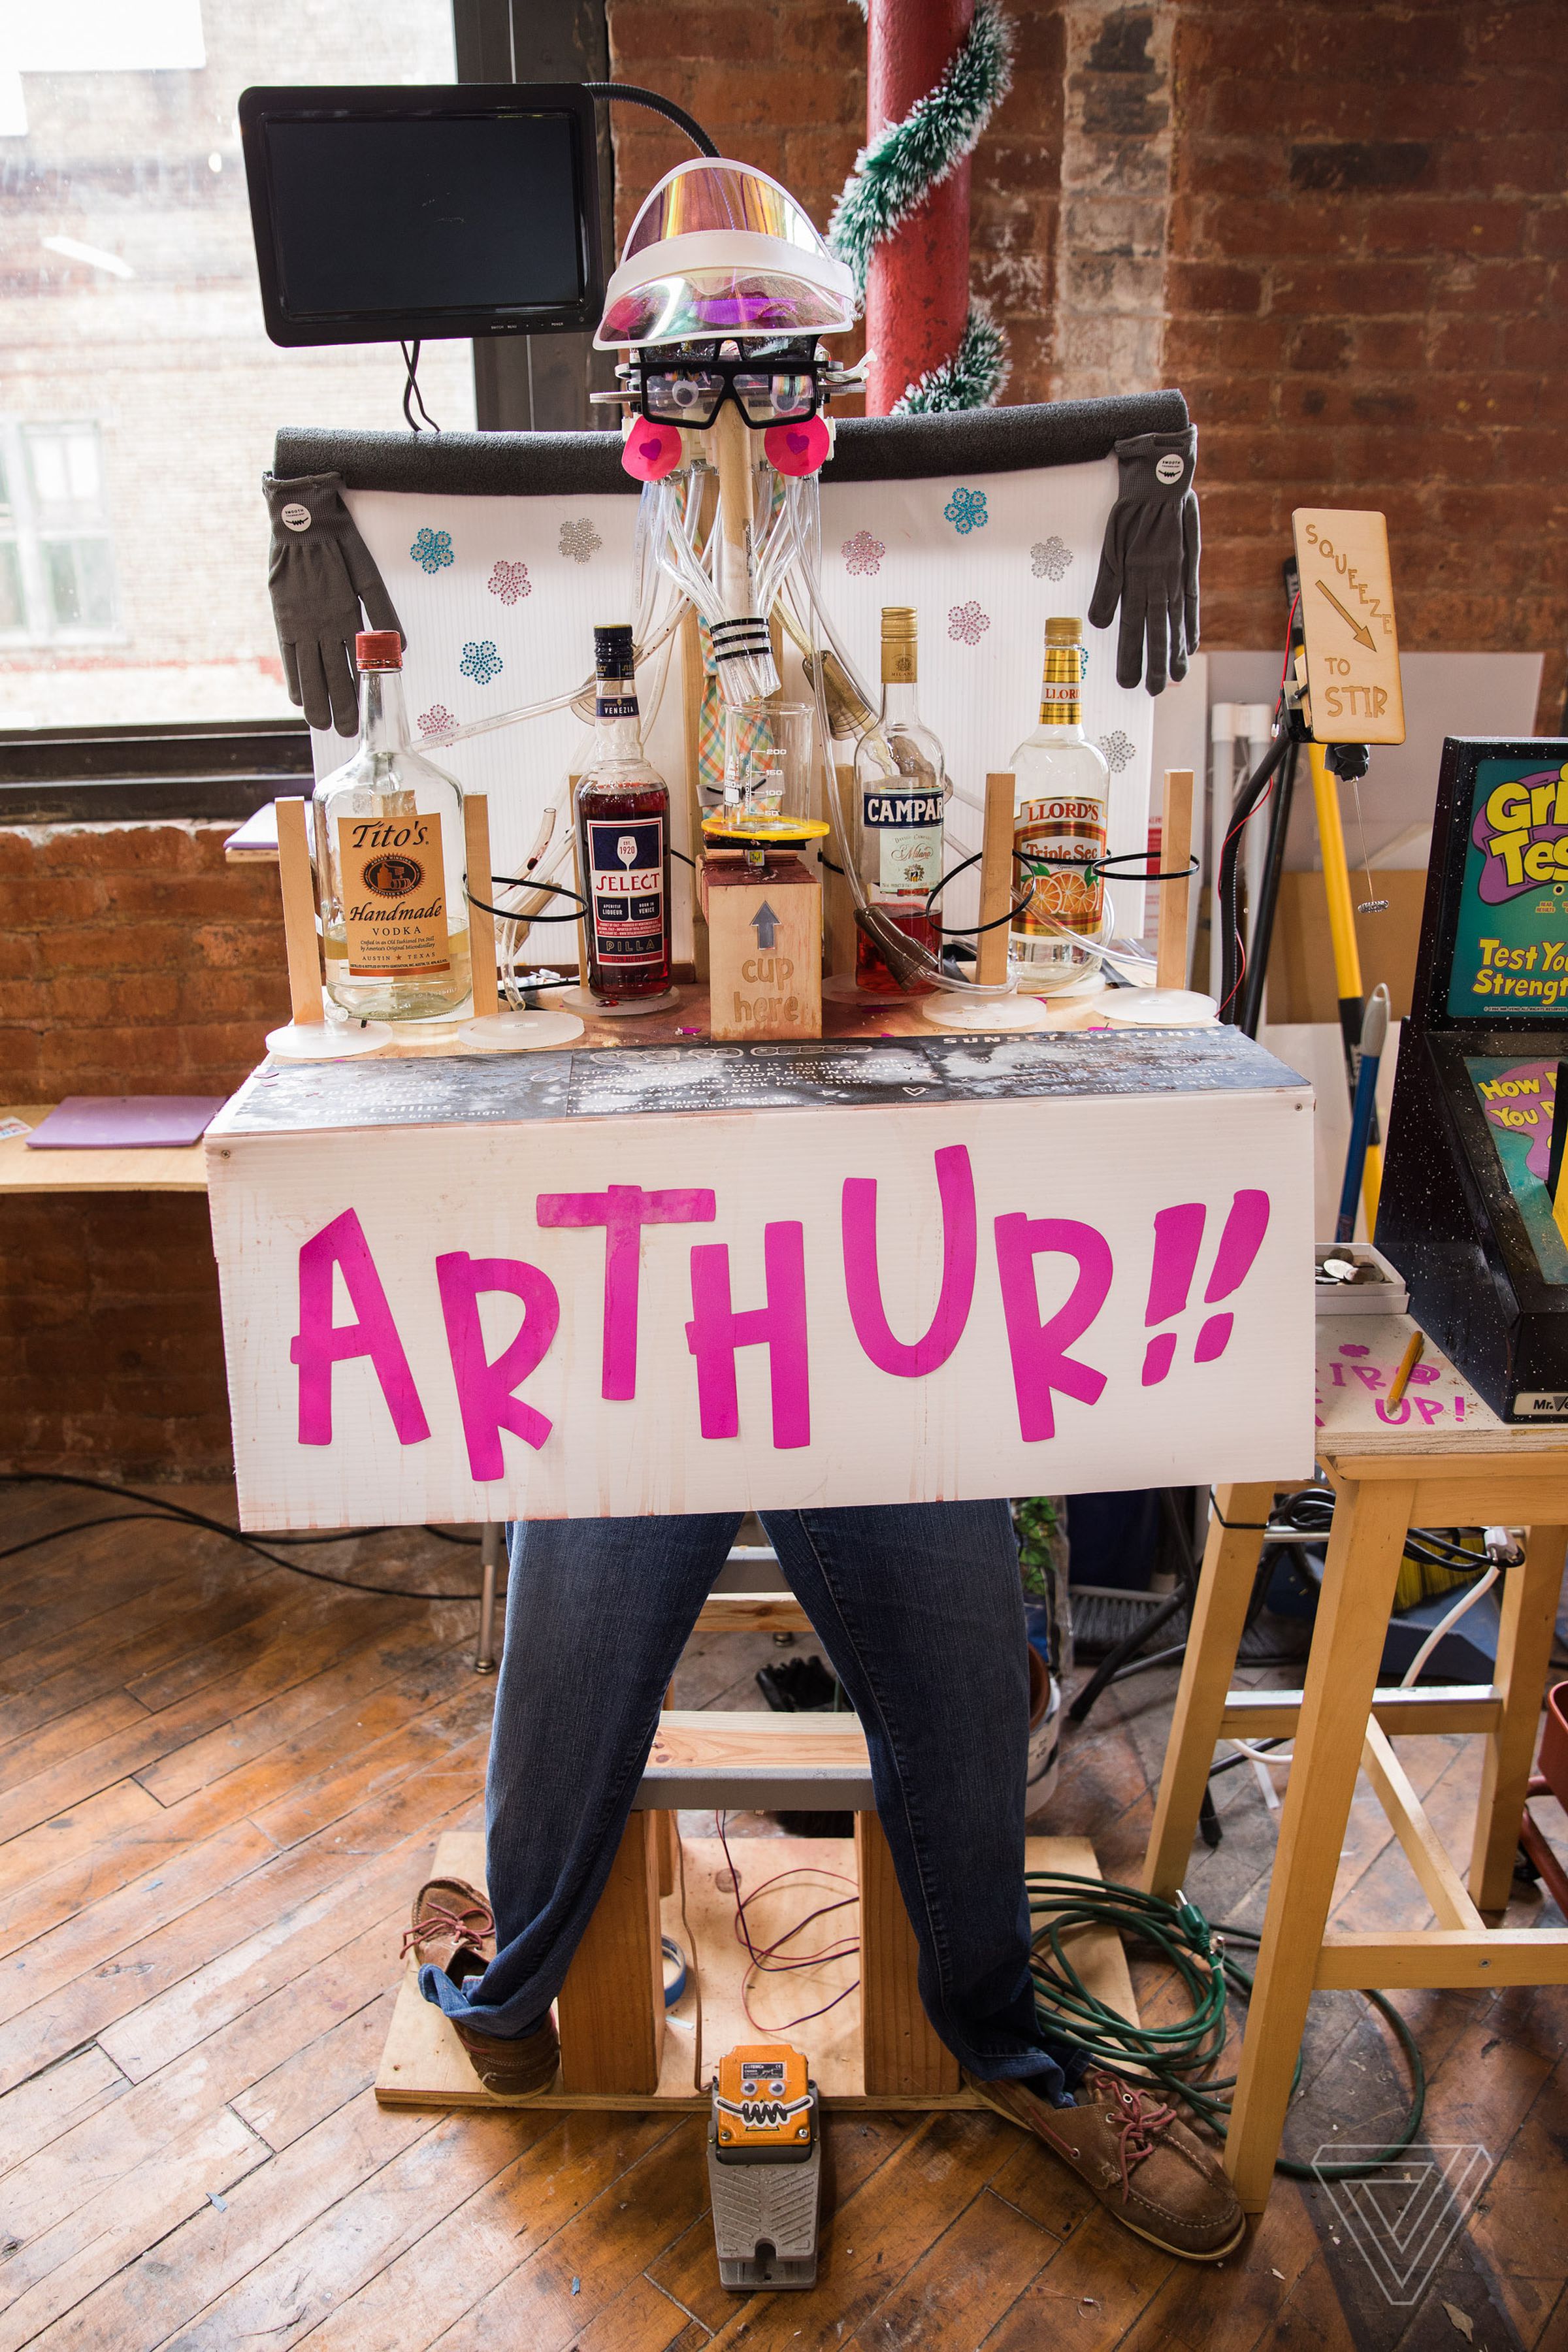 “Arthur the robotic bartender was an idea from Freaky Friday,” says Sheinkopf. “This was just for fun, but it turned into one of the hardest and most time-consuming projects we’ve worked on in a long time just because we just kept leveling it up and leveling it up.” Arthur has its own personality, with speech control, machine learning, and a facial recognition camera.